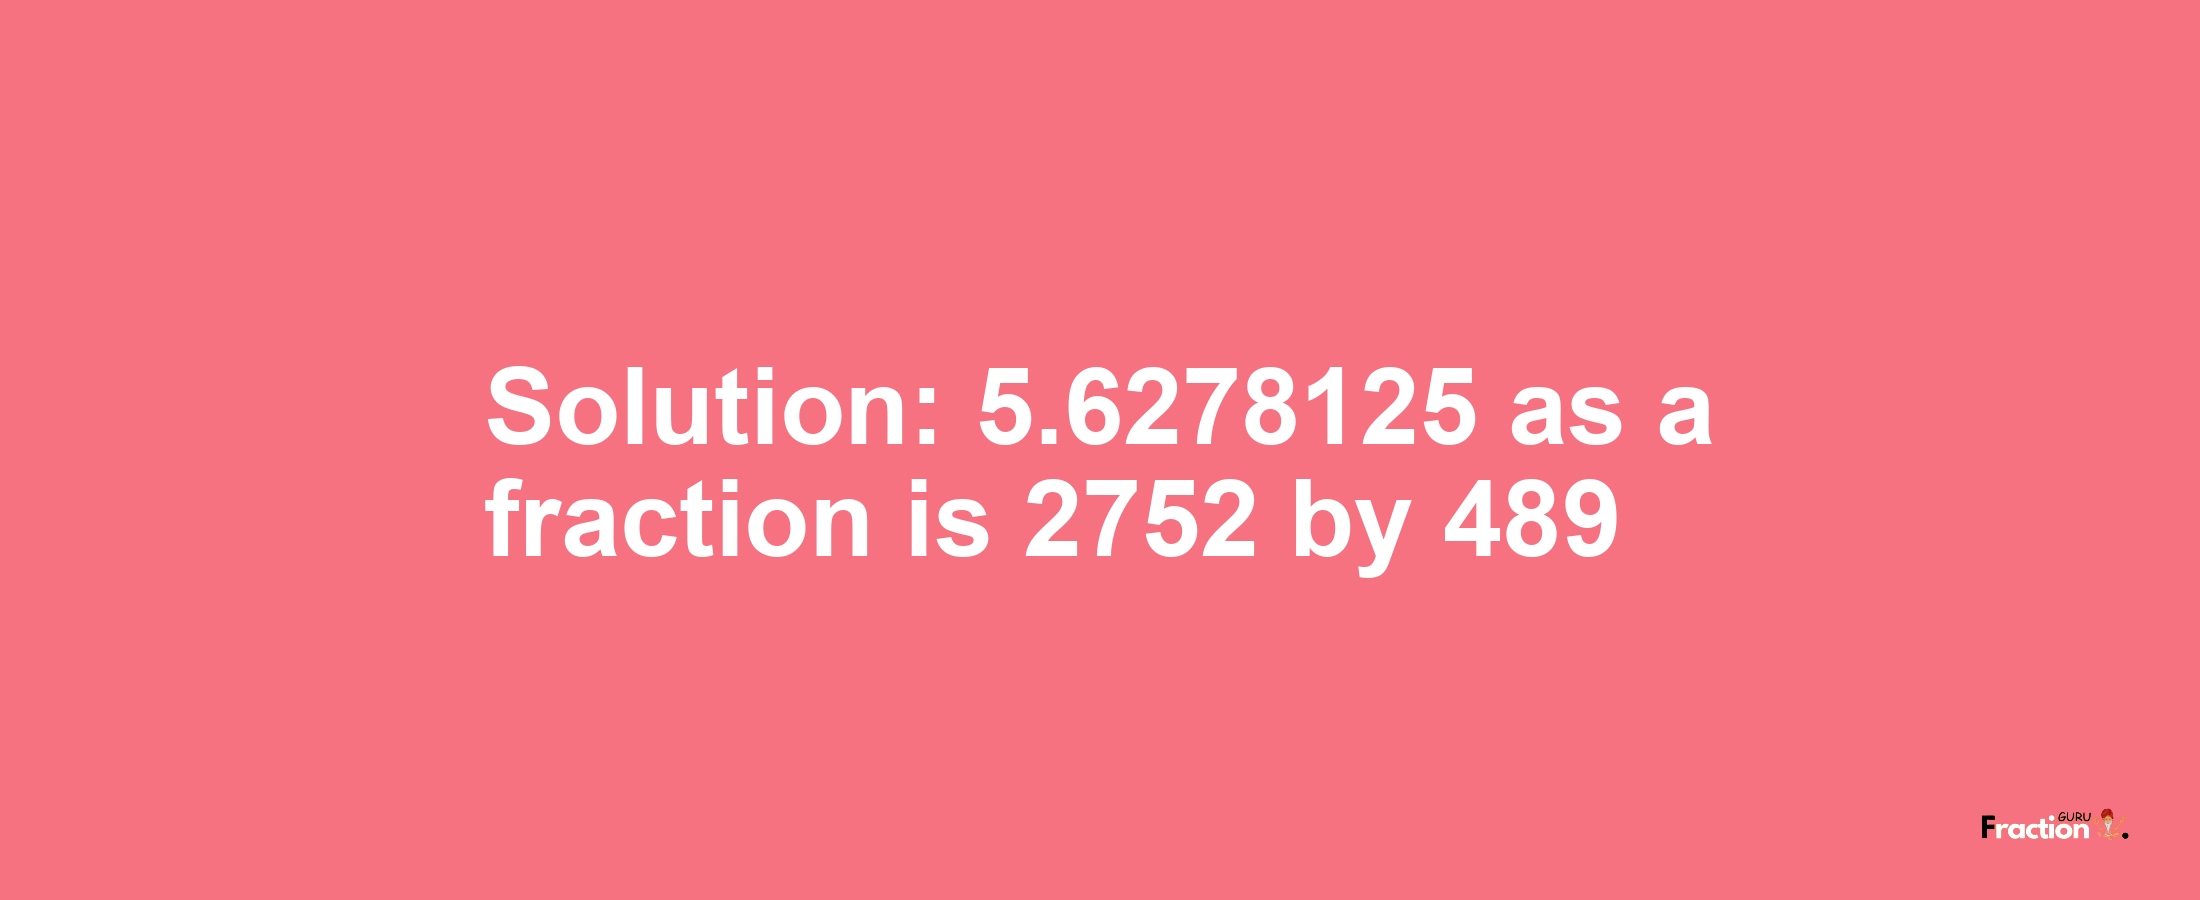 Solution:5.6278125 as a fraction is 2752/489